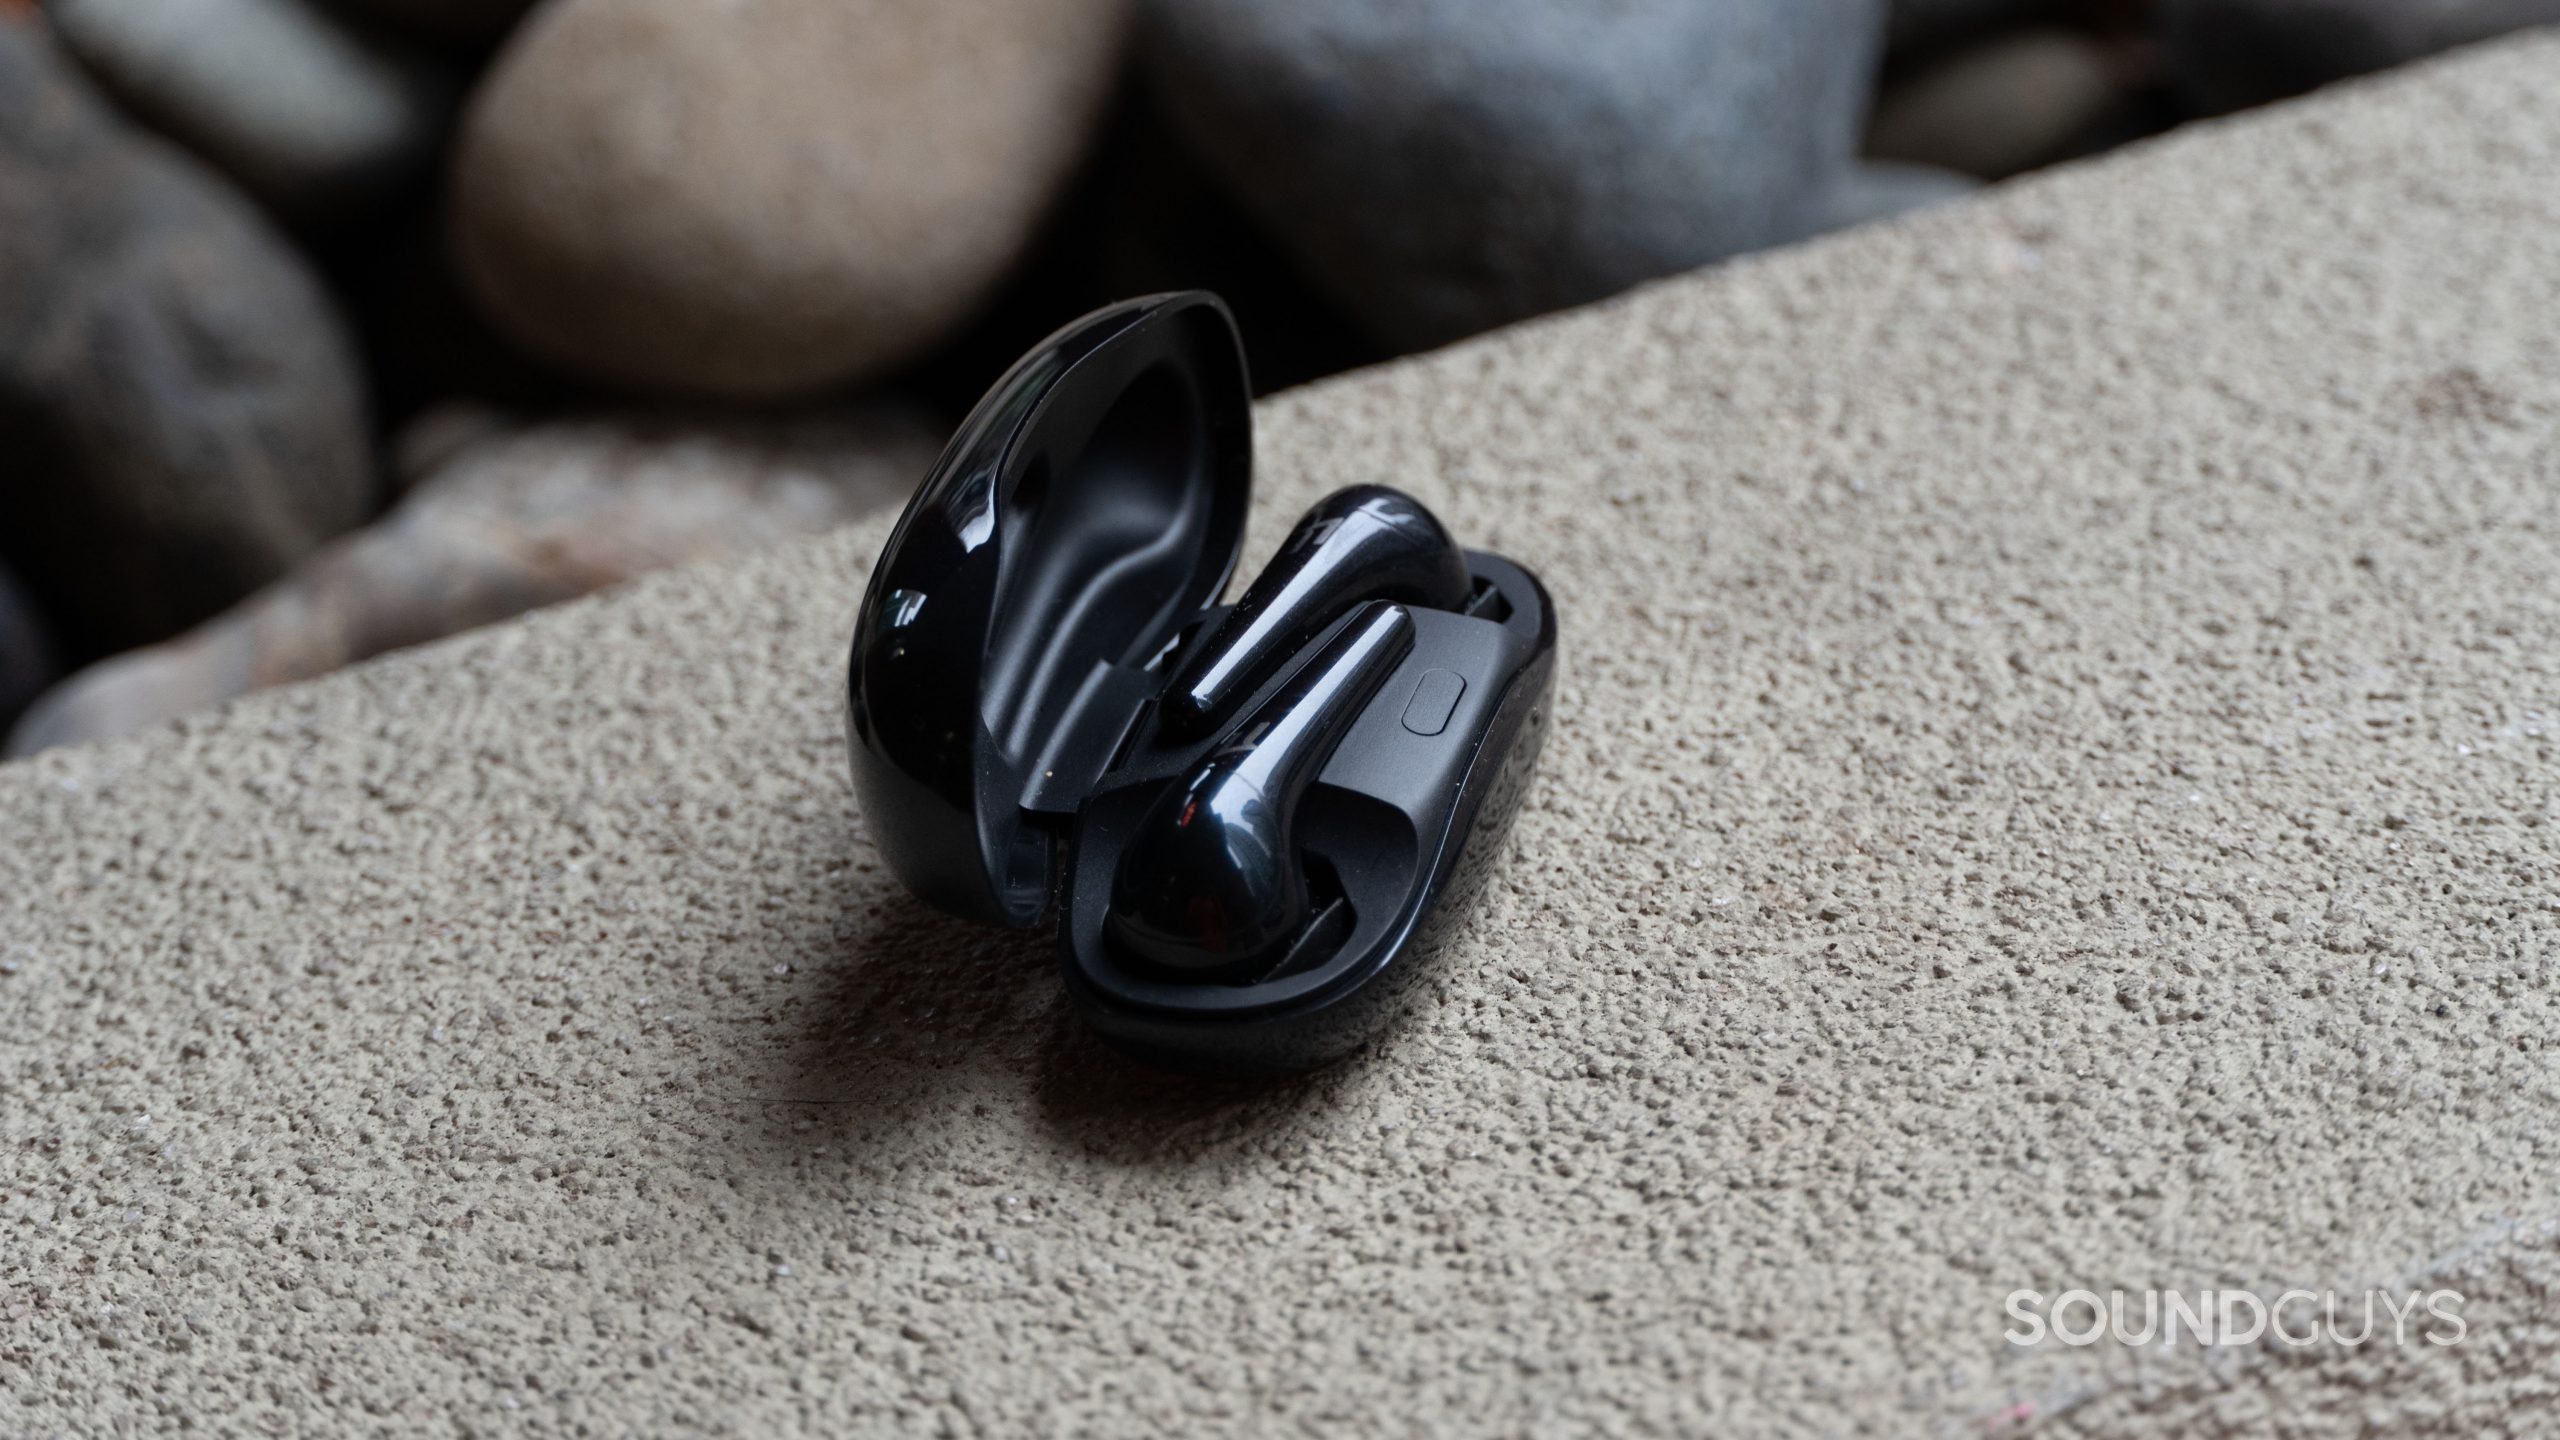 The 1MORE Comfobuds 2 earbuds in the open charging case.